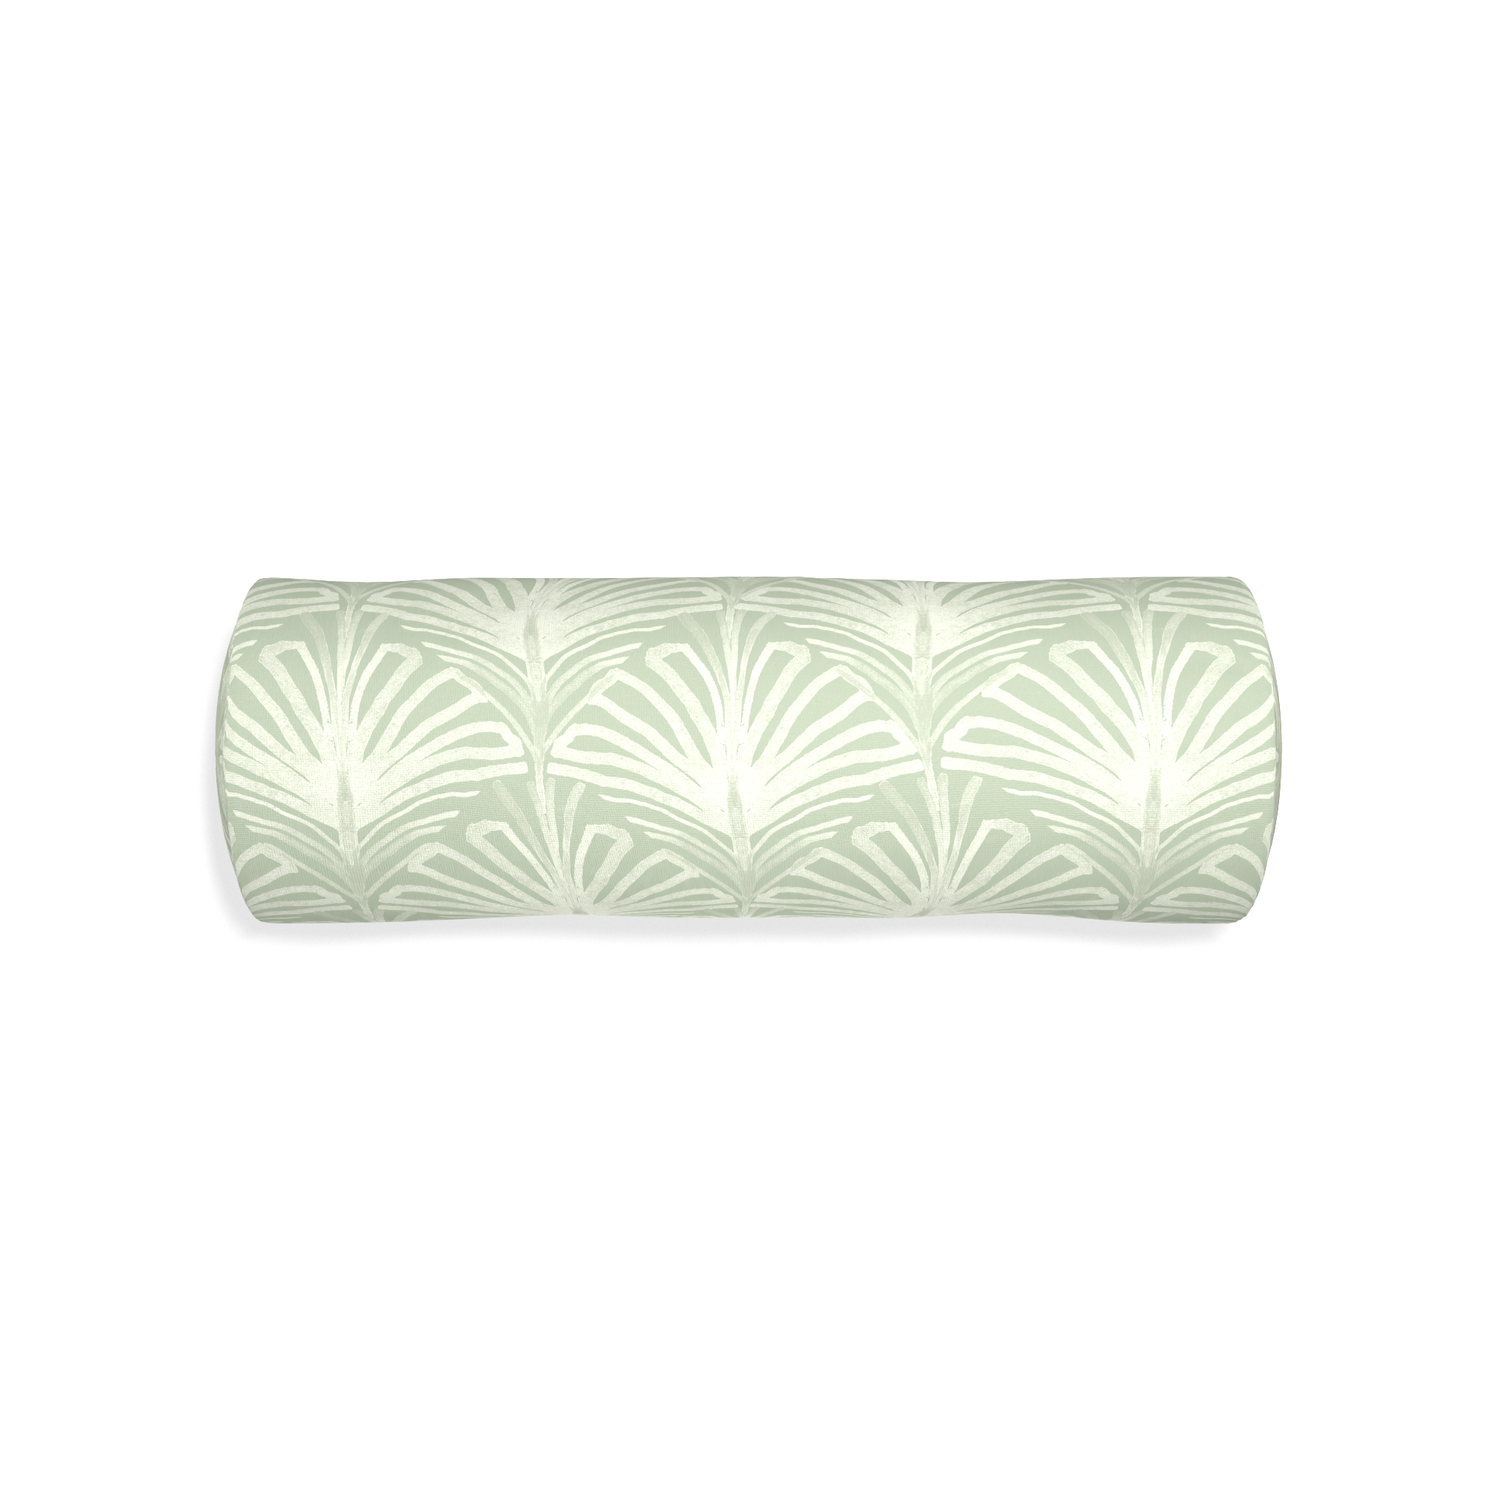 Bolster suzy sage custom sage green palmpillow with none on white background